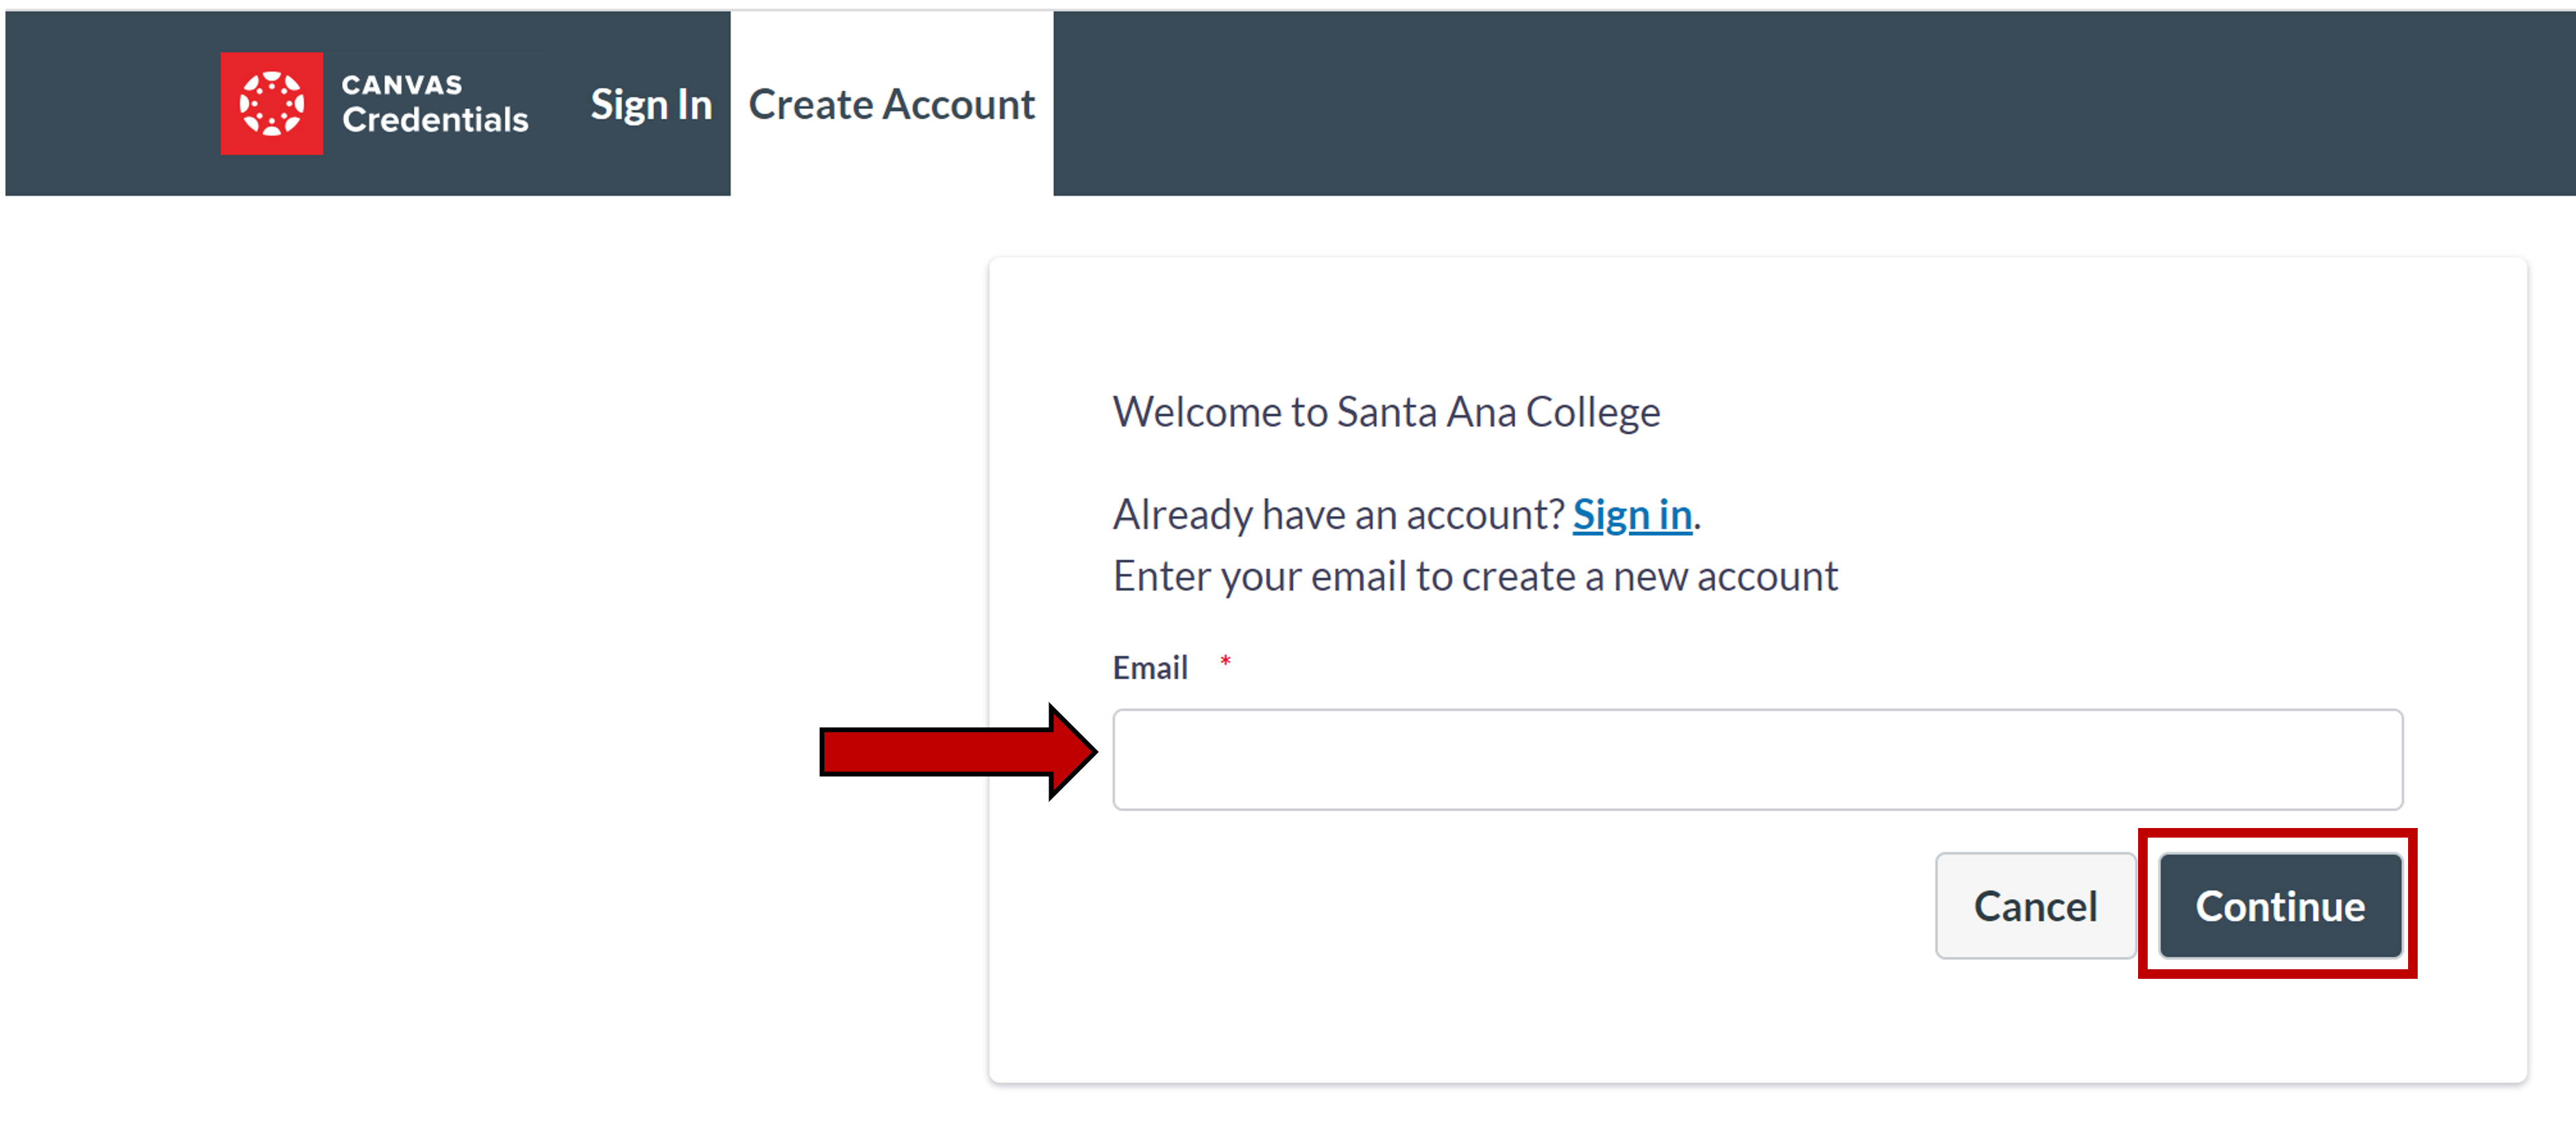 Credentials Account Creation Add Email.png